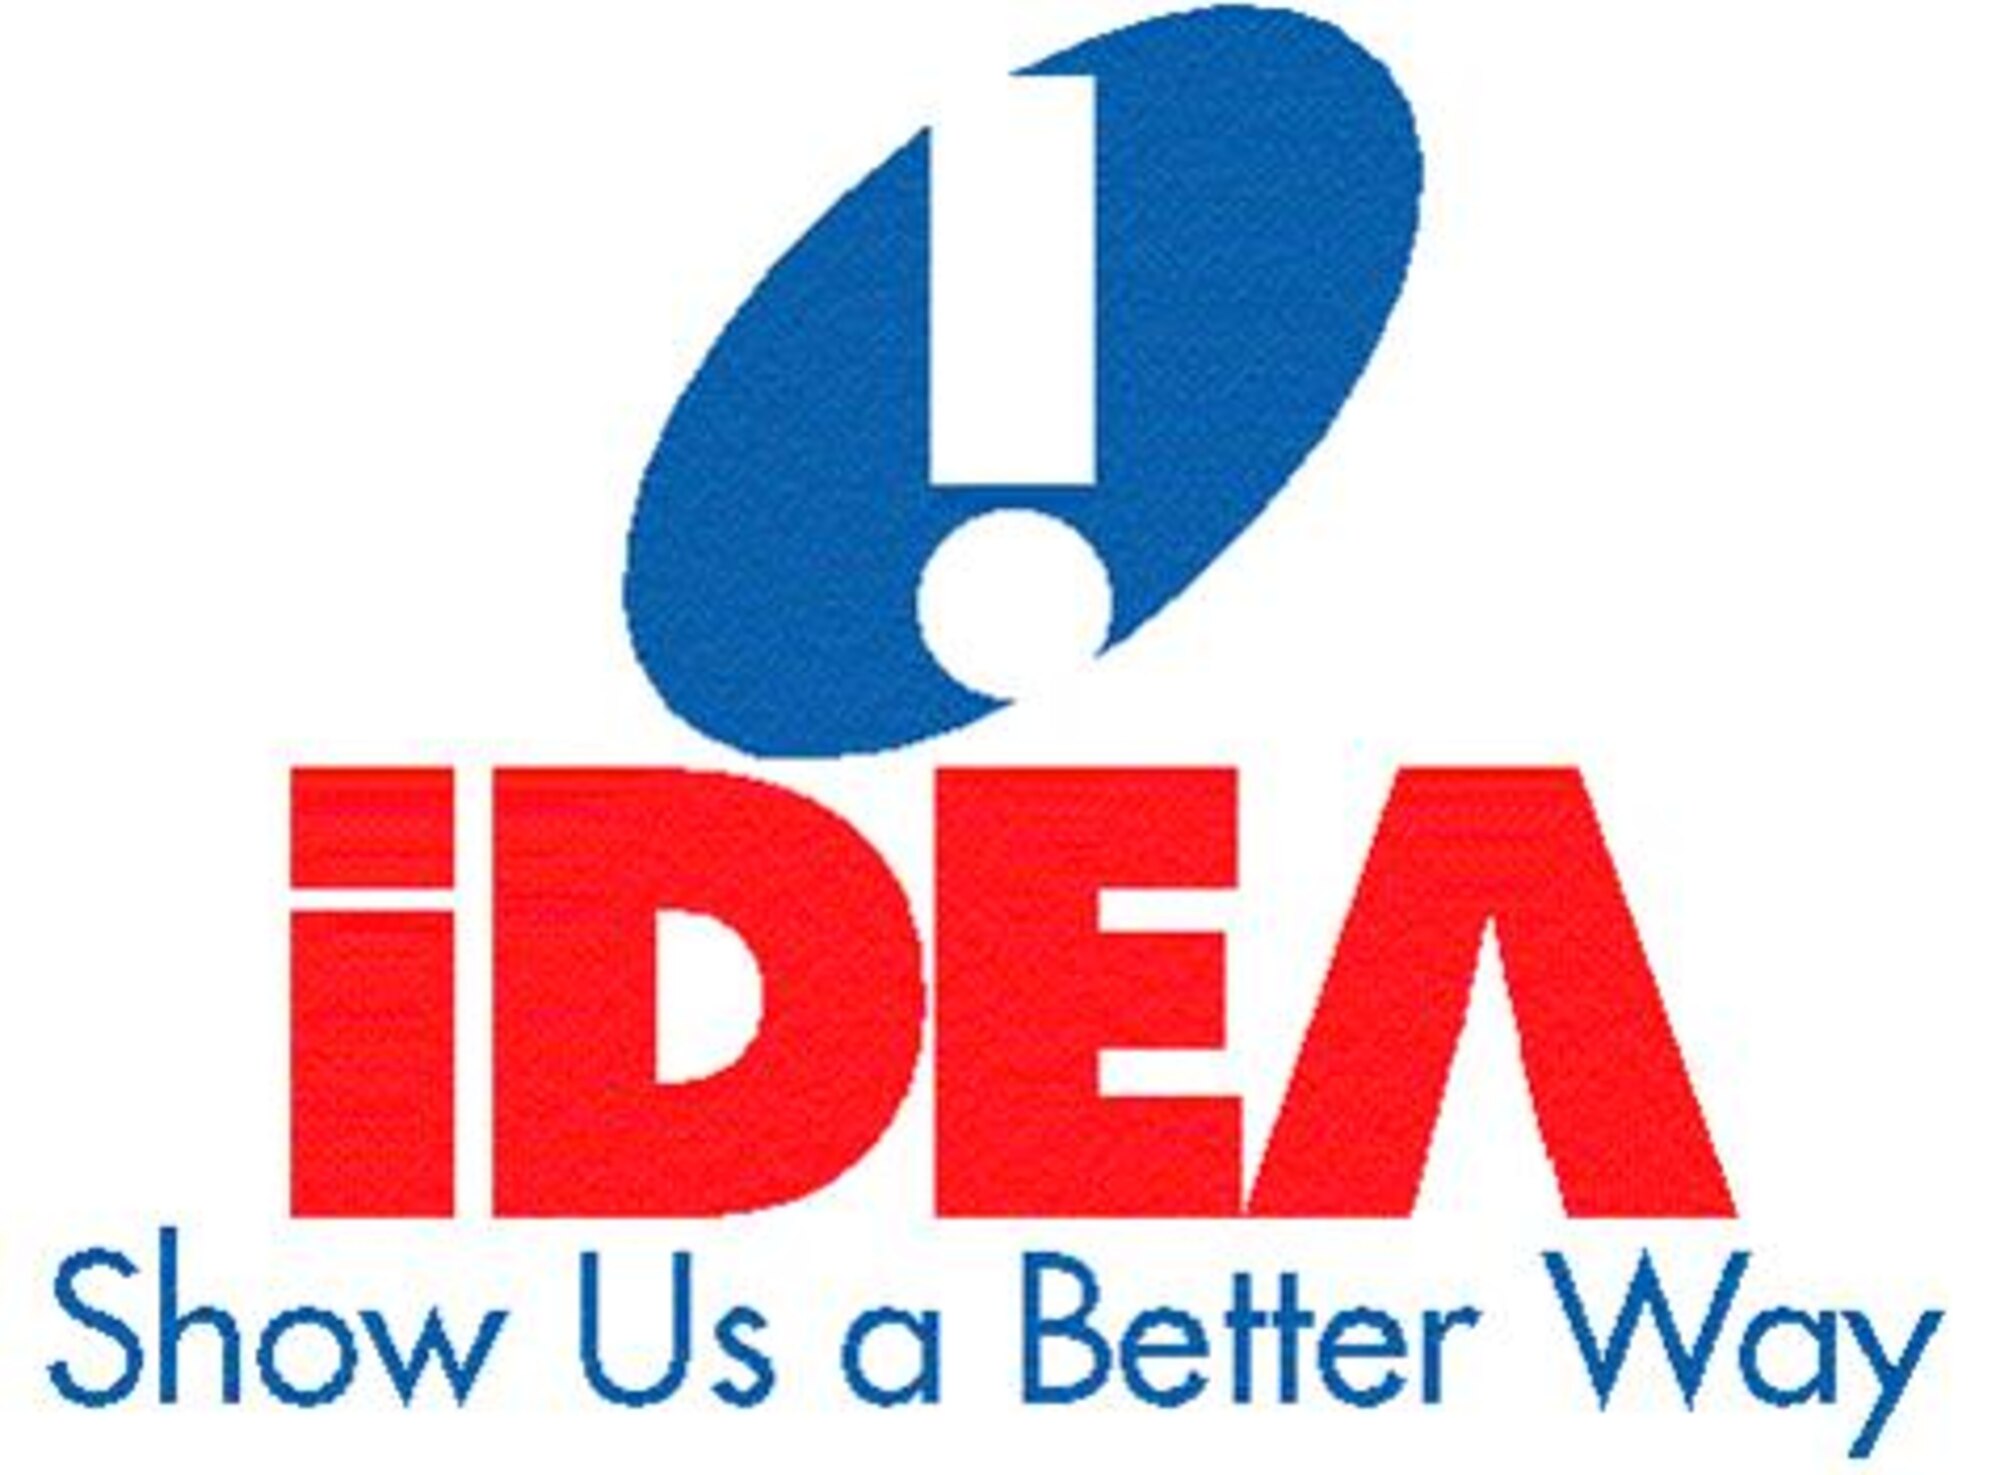 Want some cash? Try submitting an idea to the IDEA program